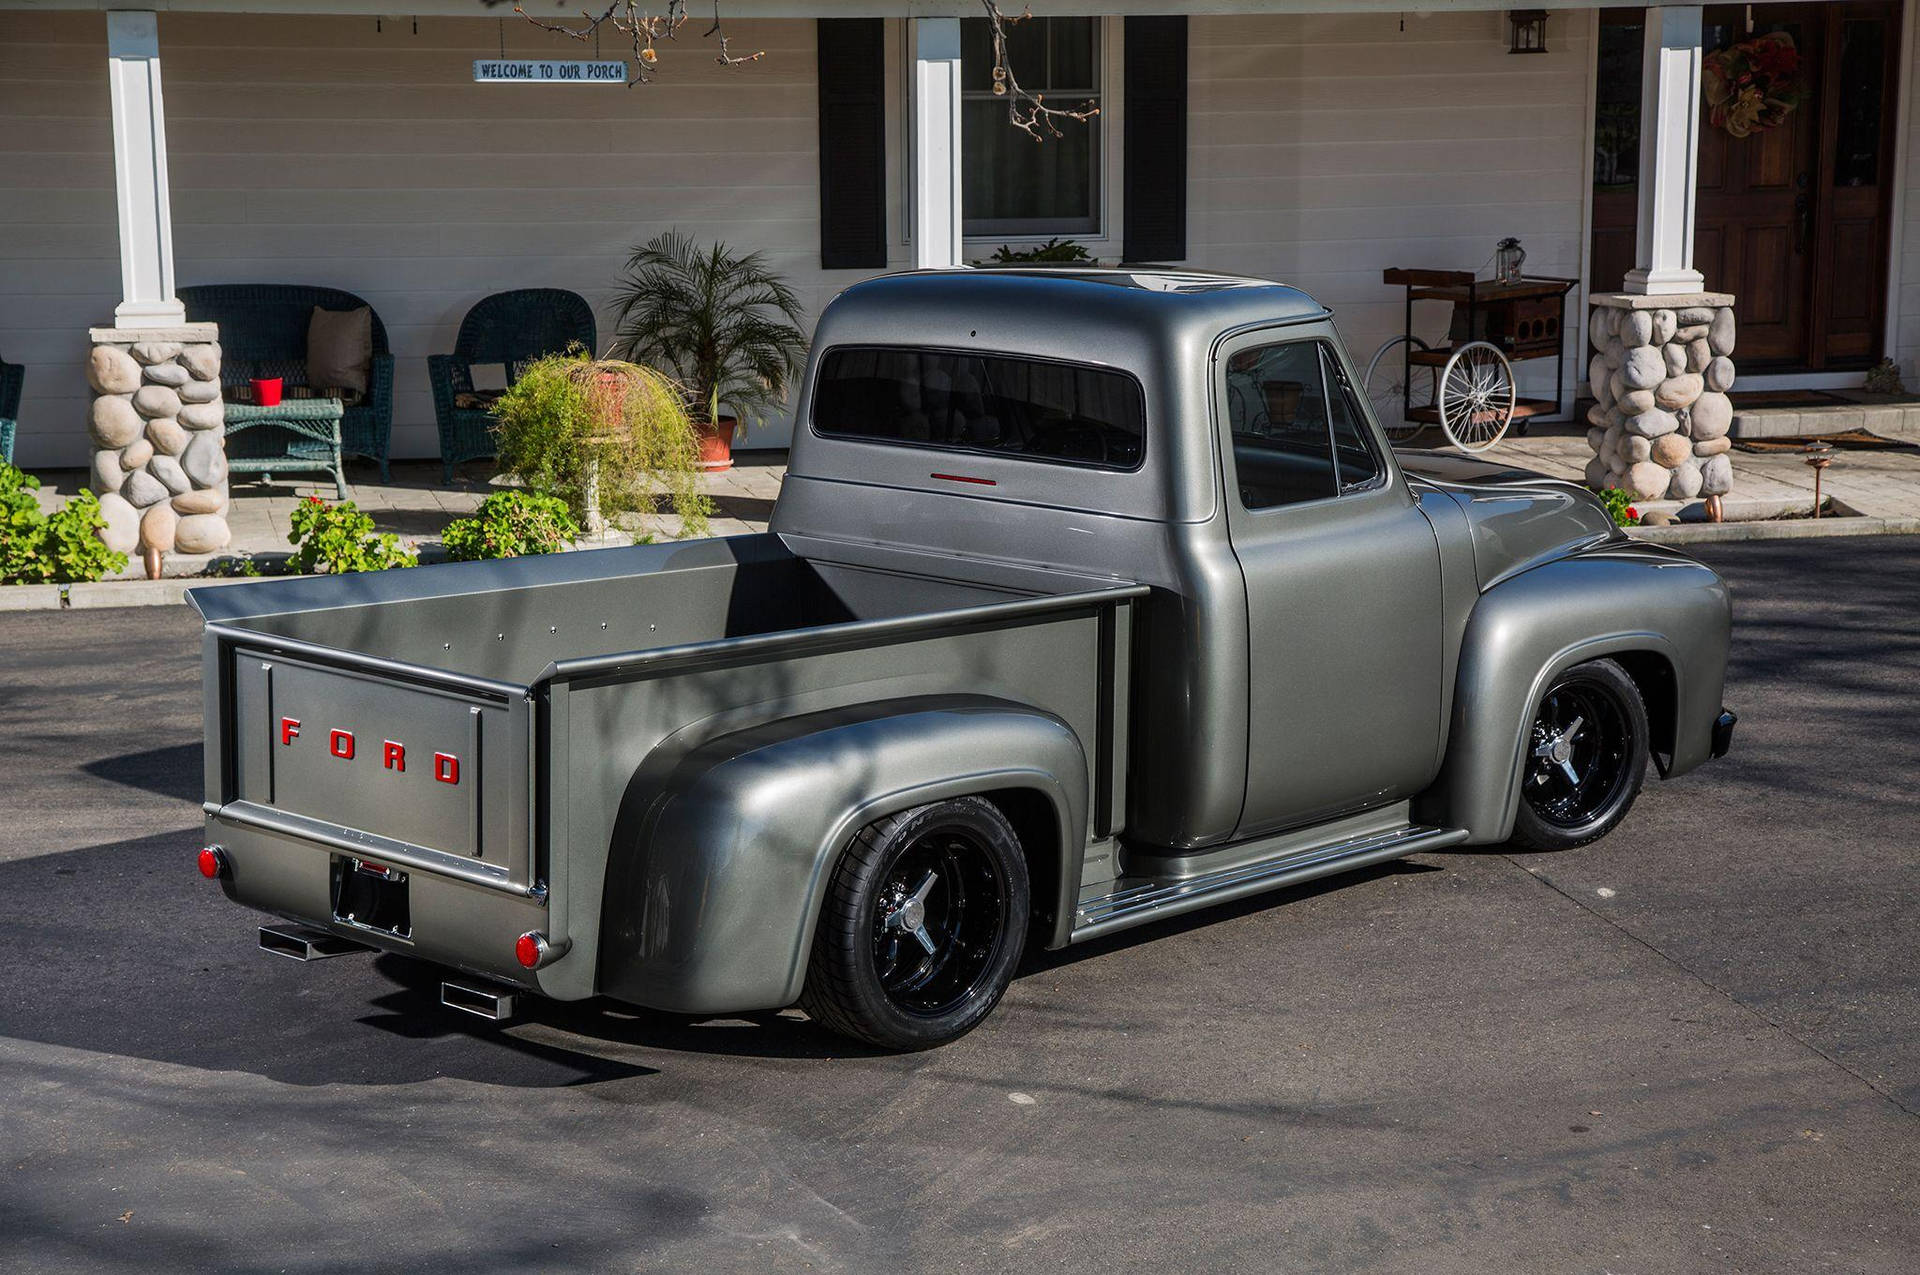 Vintage Beauty - Stunning Grey Old Ford Truck Background